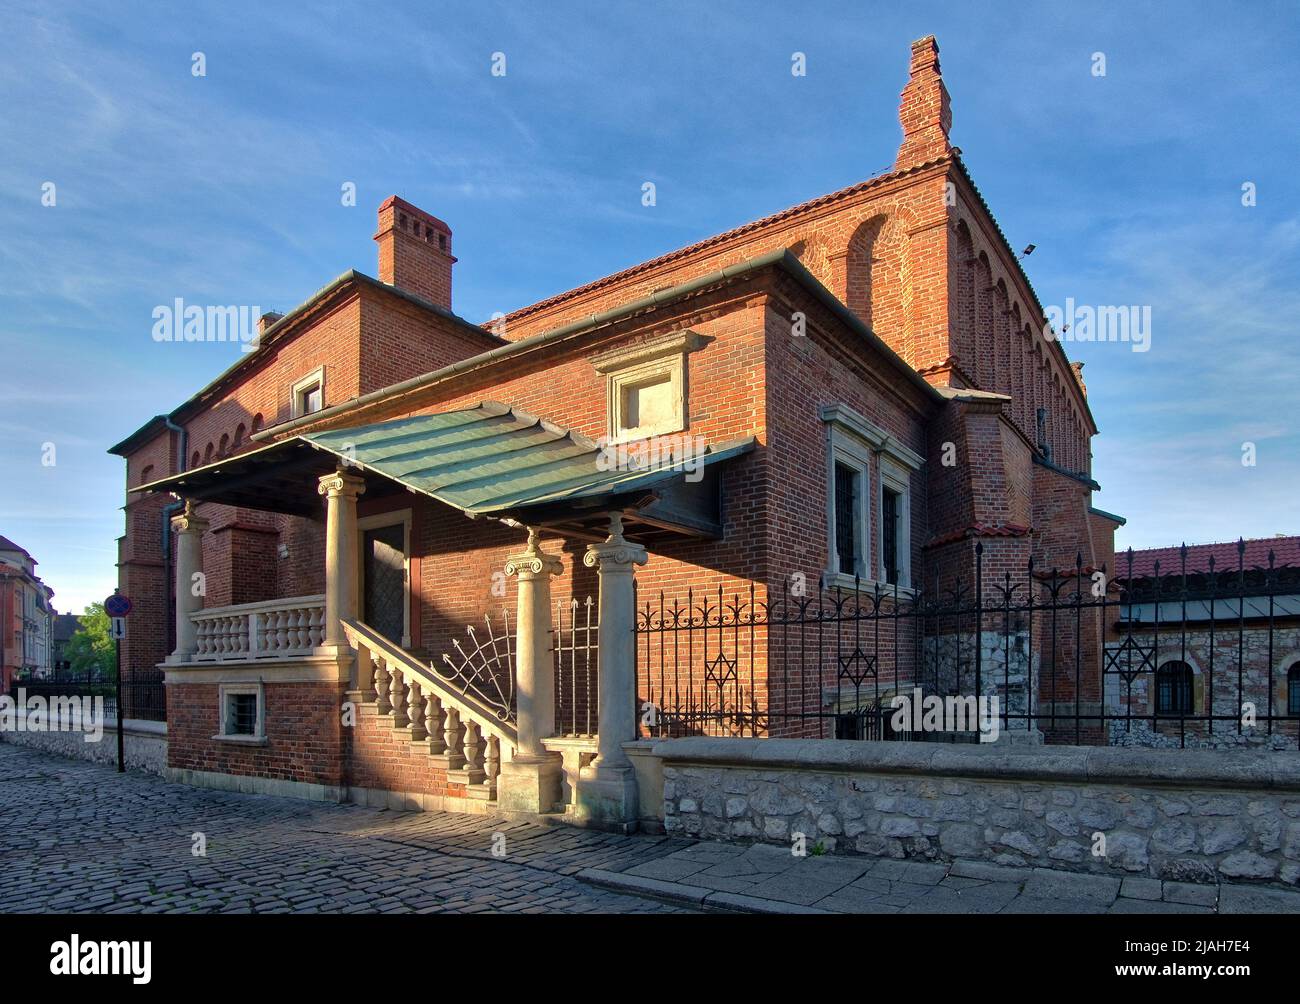 The Old Synagogue - a synagogue located in Kazimierz, Krakow, at 24 Szeroka Street. It is one of the oldest preserved synagogues in Poland. Stock Photo